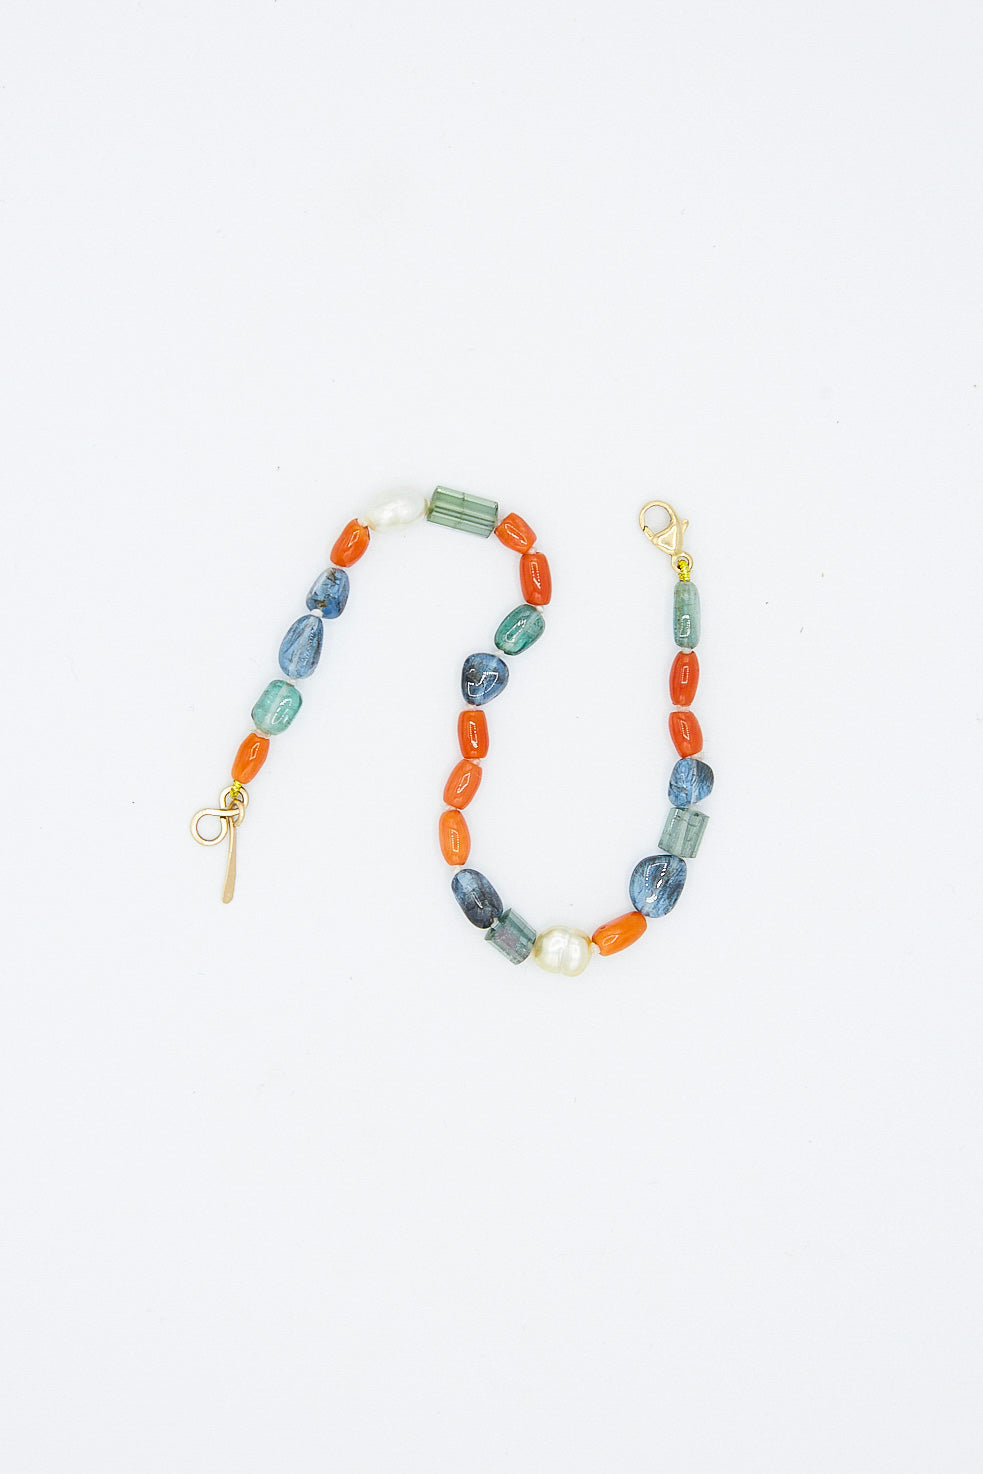 Mary MacGill Egyptian amethyst bead layering bracelet. Overhead view.  Blue, orange, green colored beads.